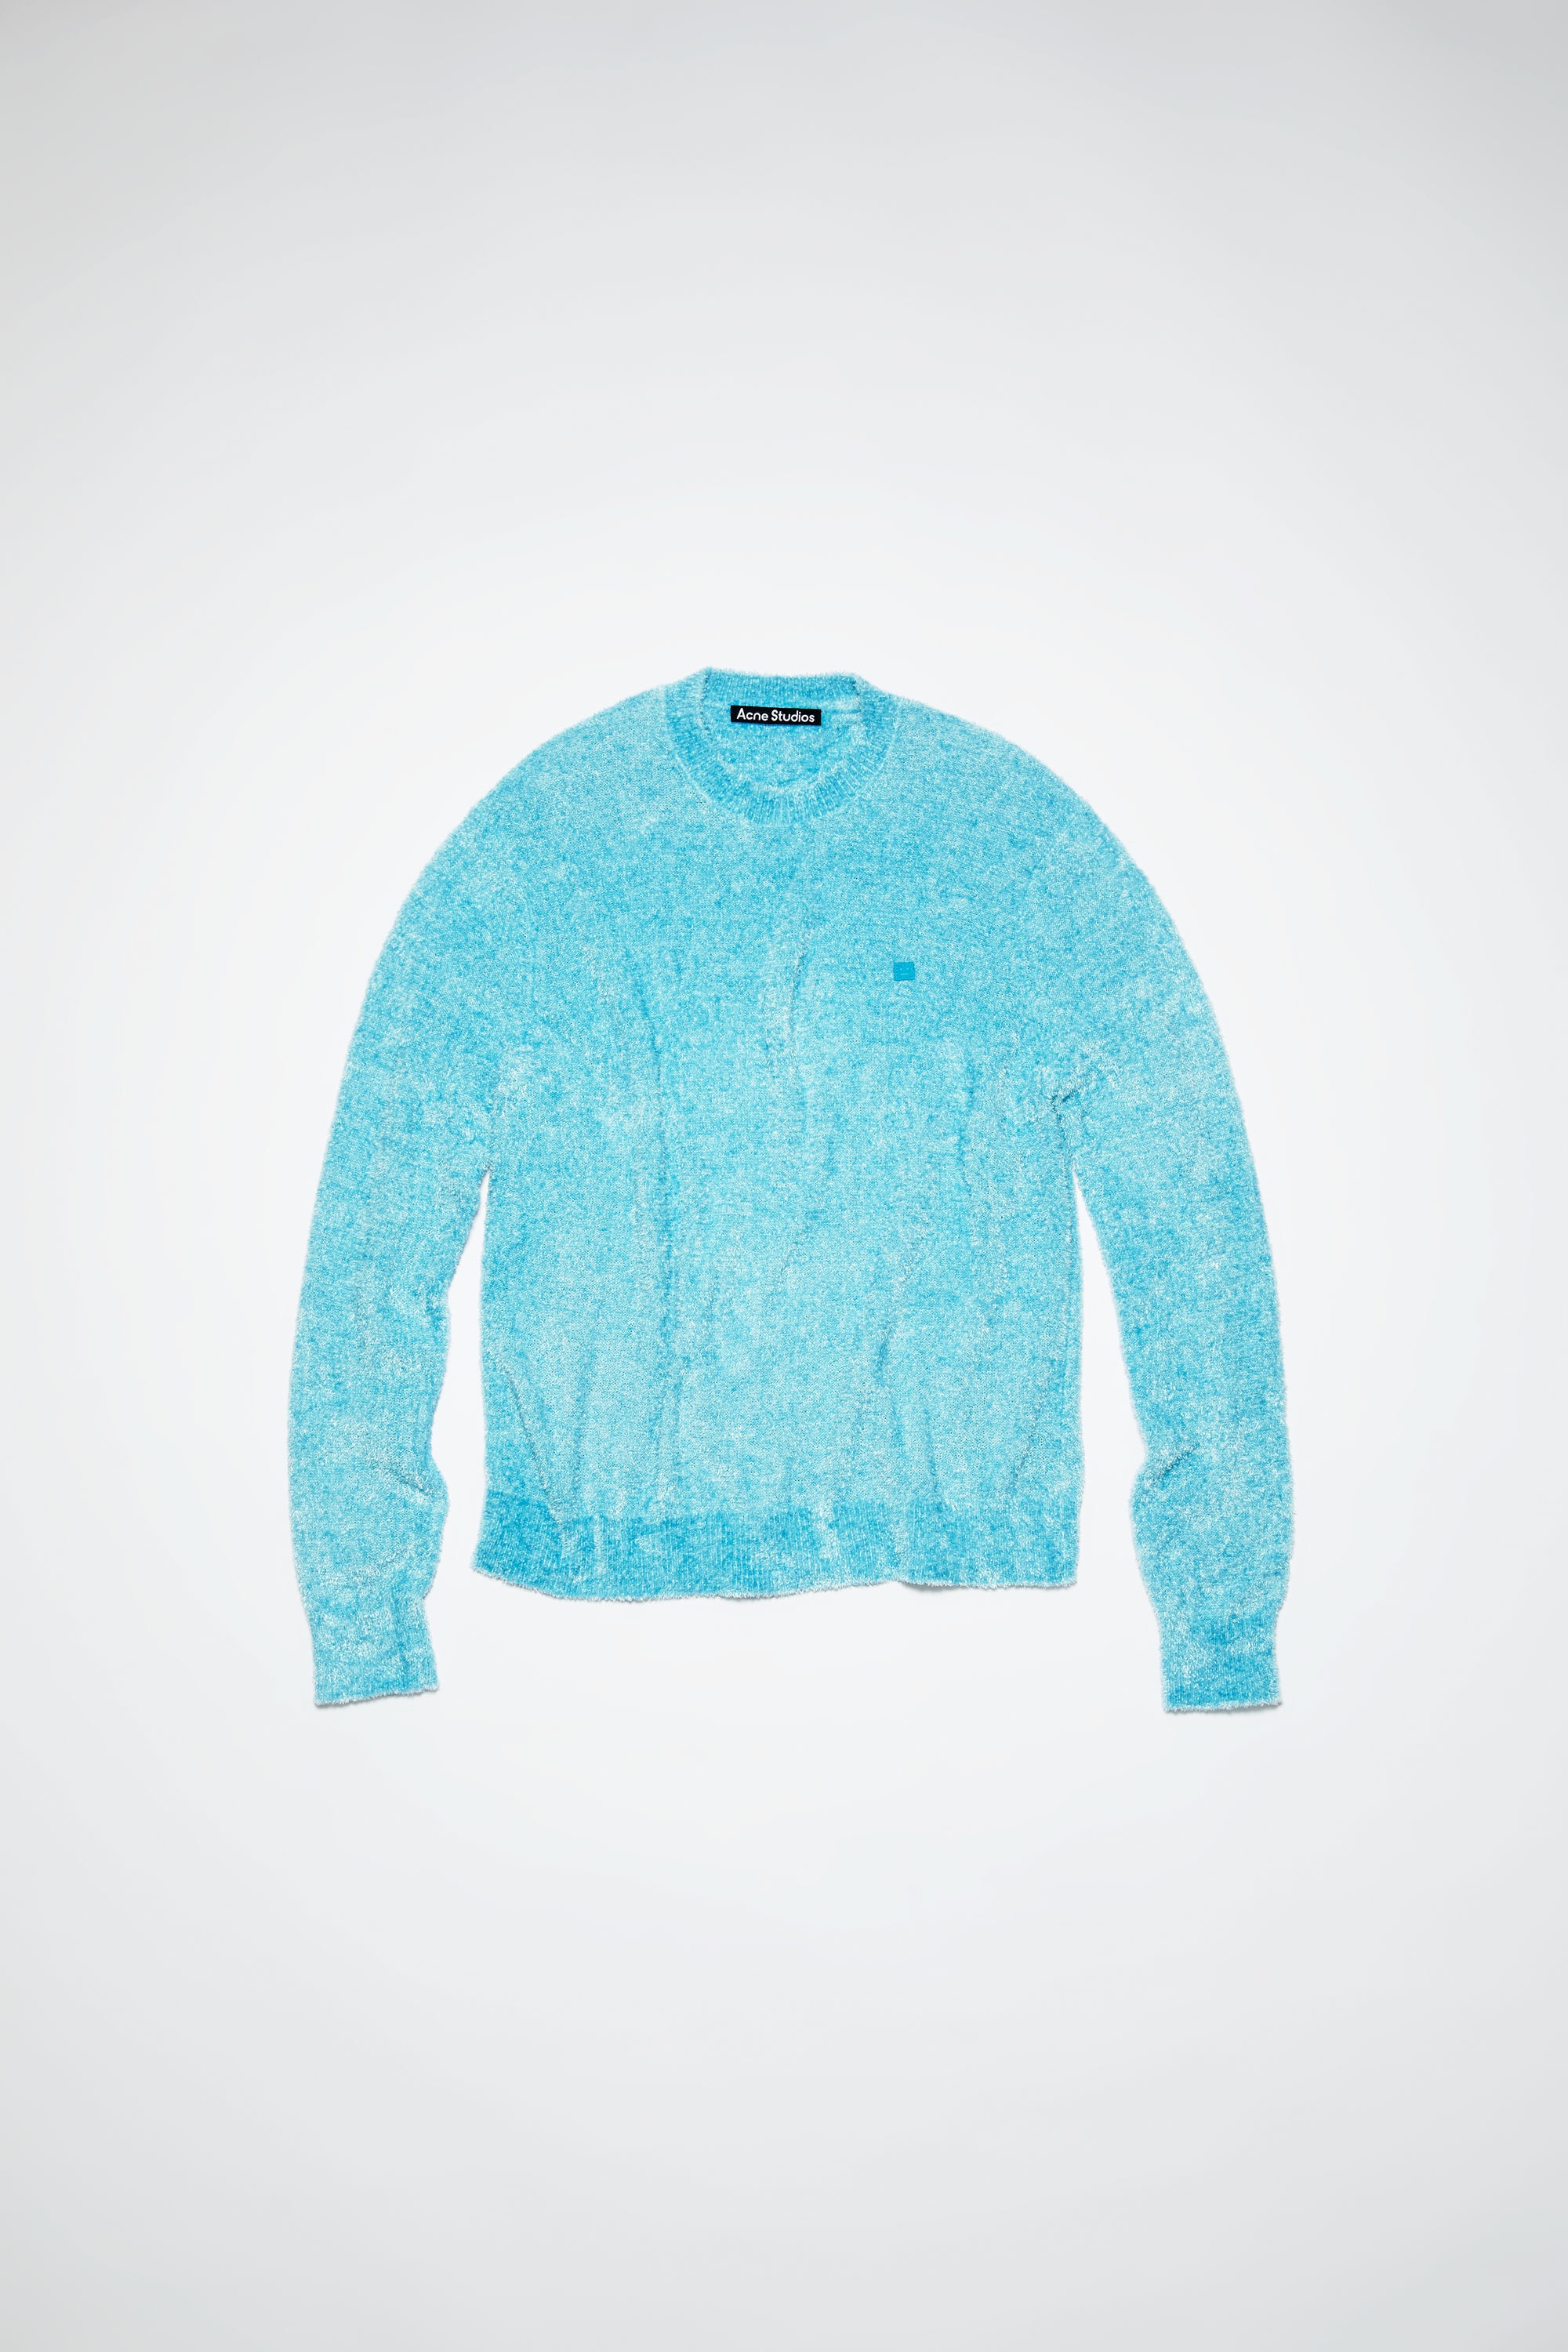 Textured sweater - Teal blue - 1